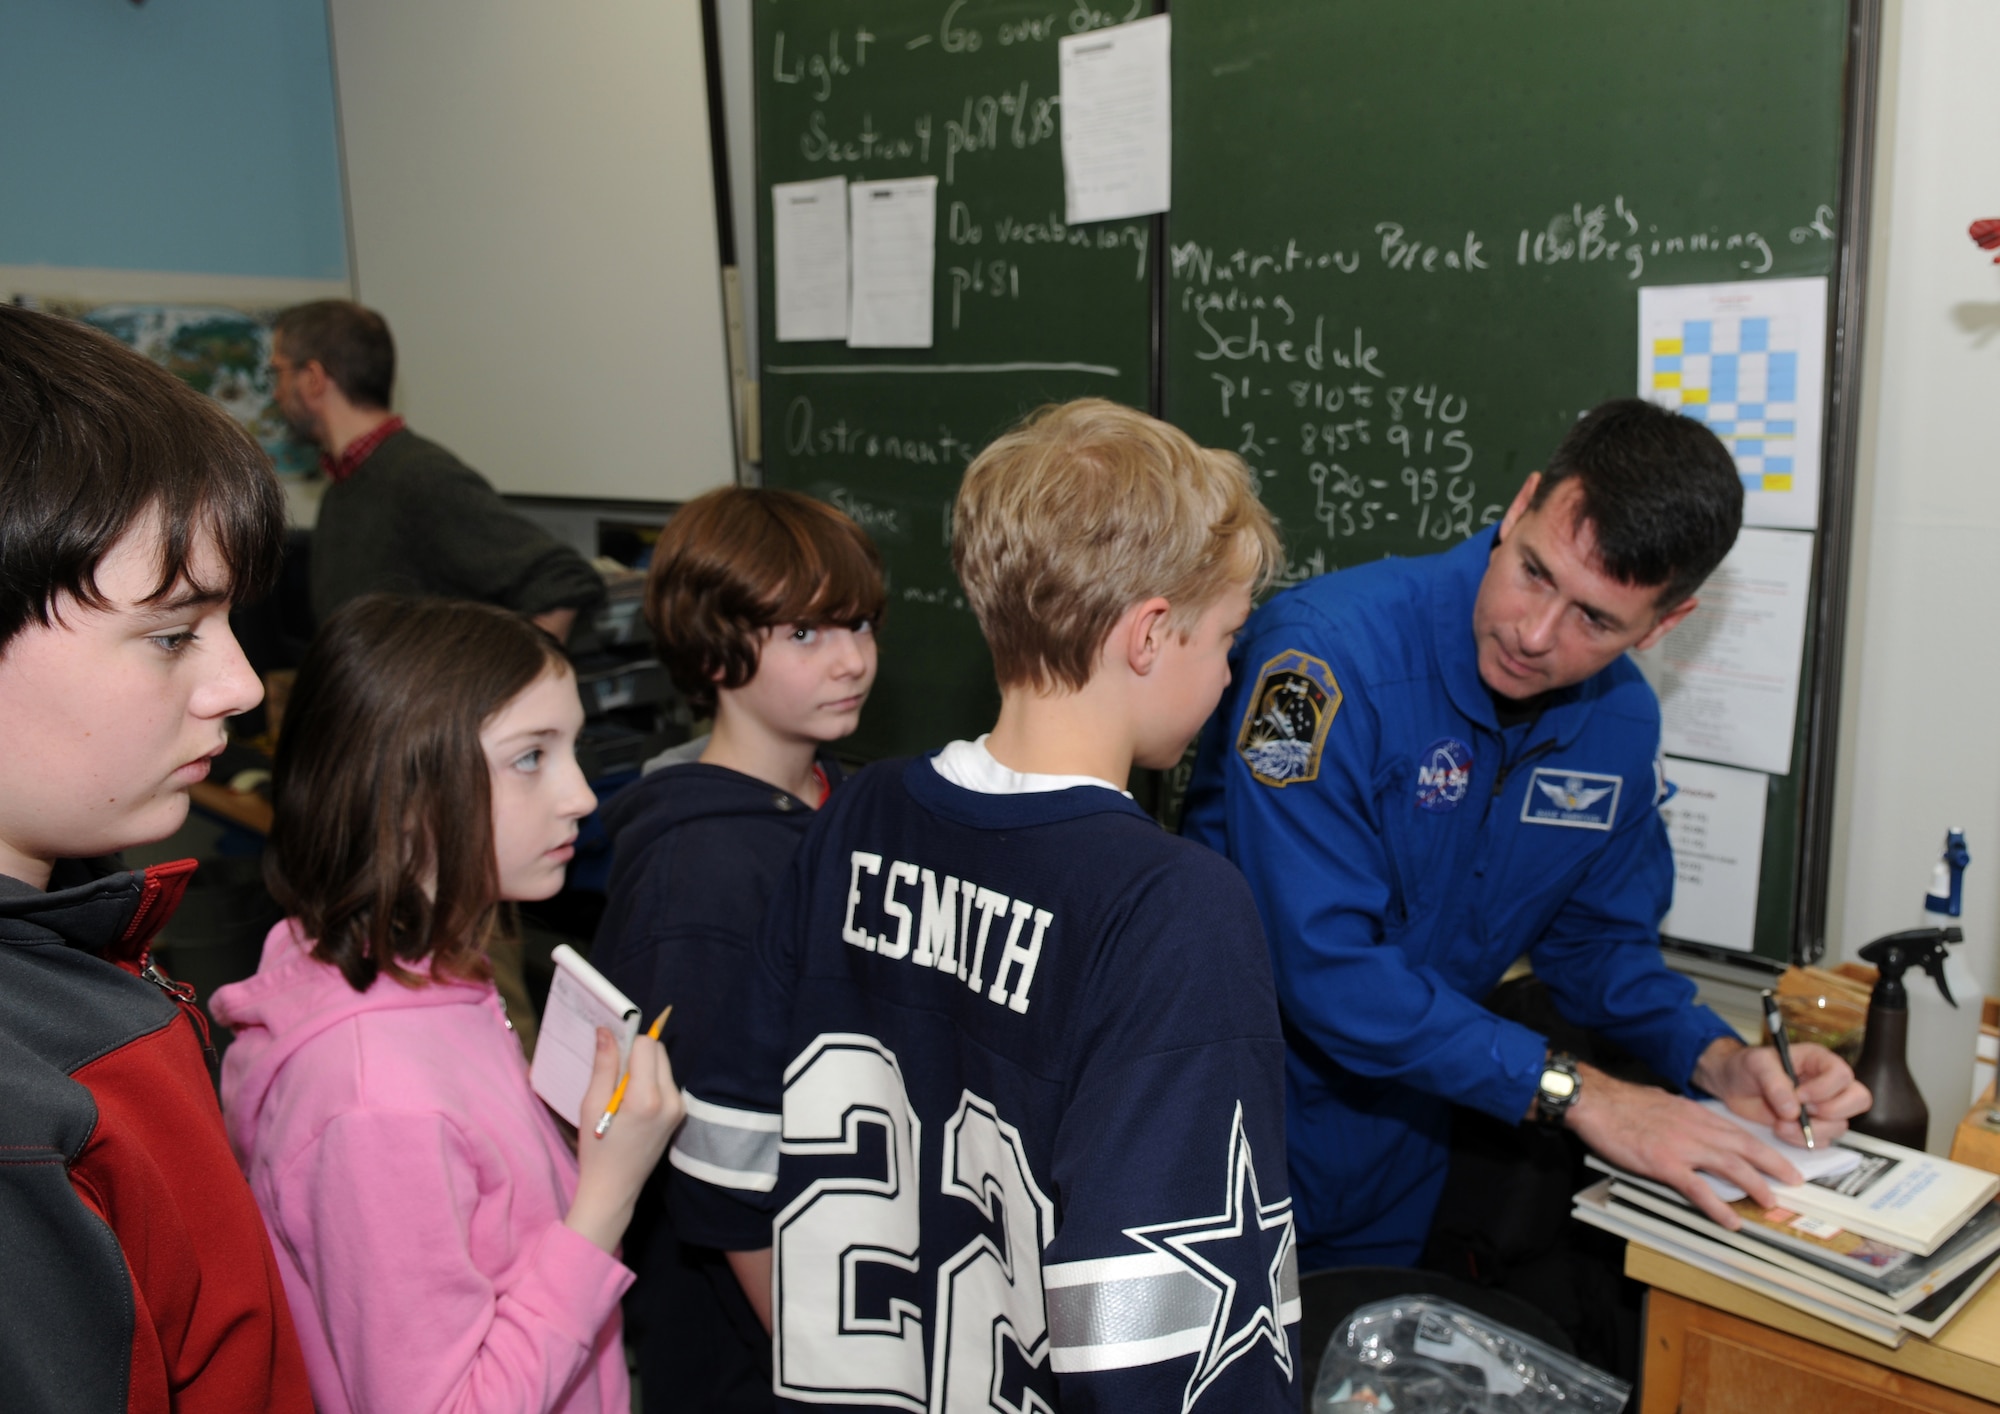 Army Lt. Col. Robert Kimbrough, NASA Astronaut, talks with Ramstein Middle School students during a visit to Ramstein Air Base Feb. 4, 2009. Colonel Kimbrough was one of six astronauts who participated in an Armed Forces Entertainment tour to visit troops downrange and students in the Kaiserslautern Military Community. (U.S. Air Force photo by Airman 1st Class Scott Saldukas)
